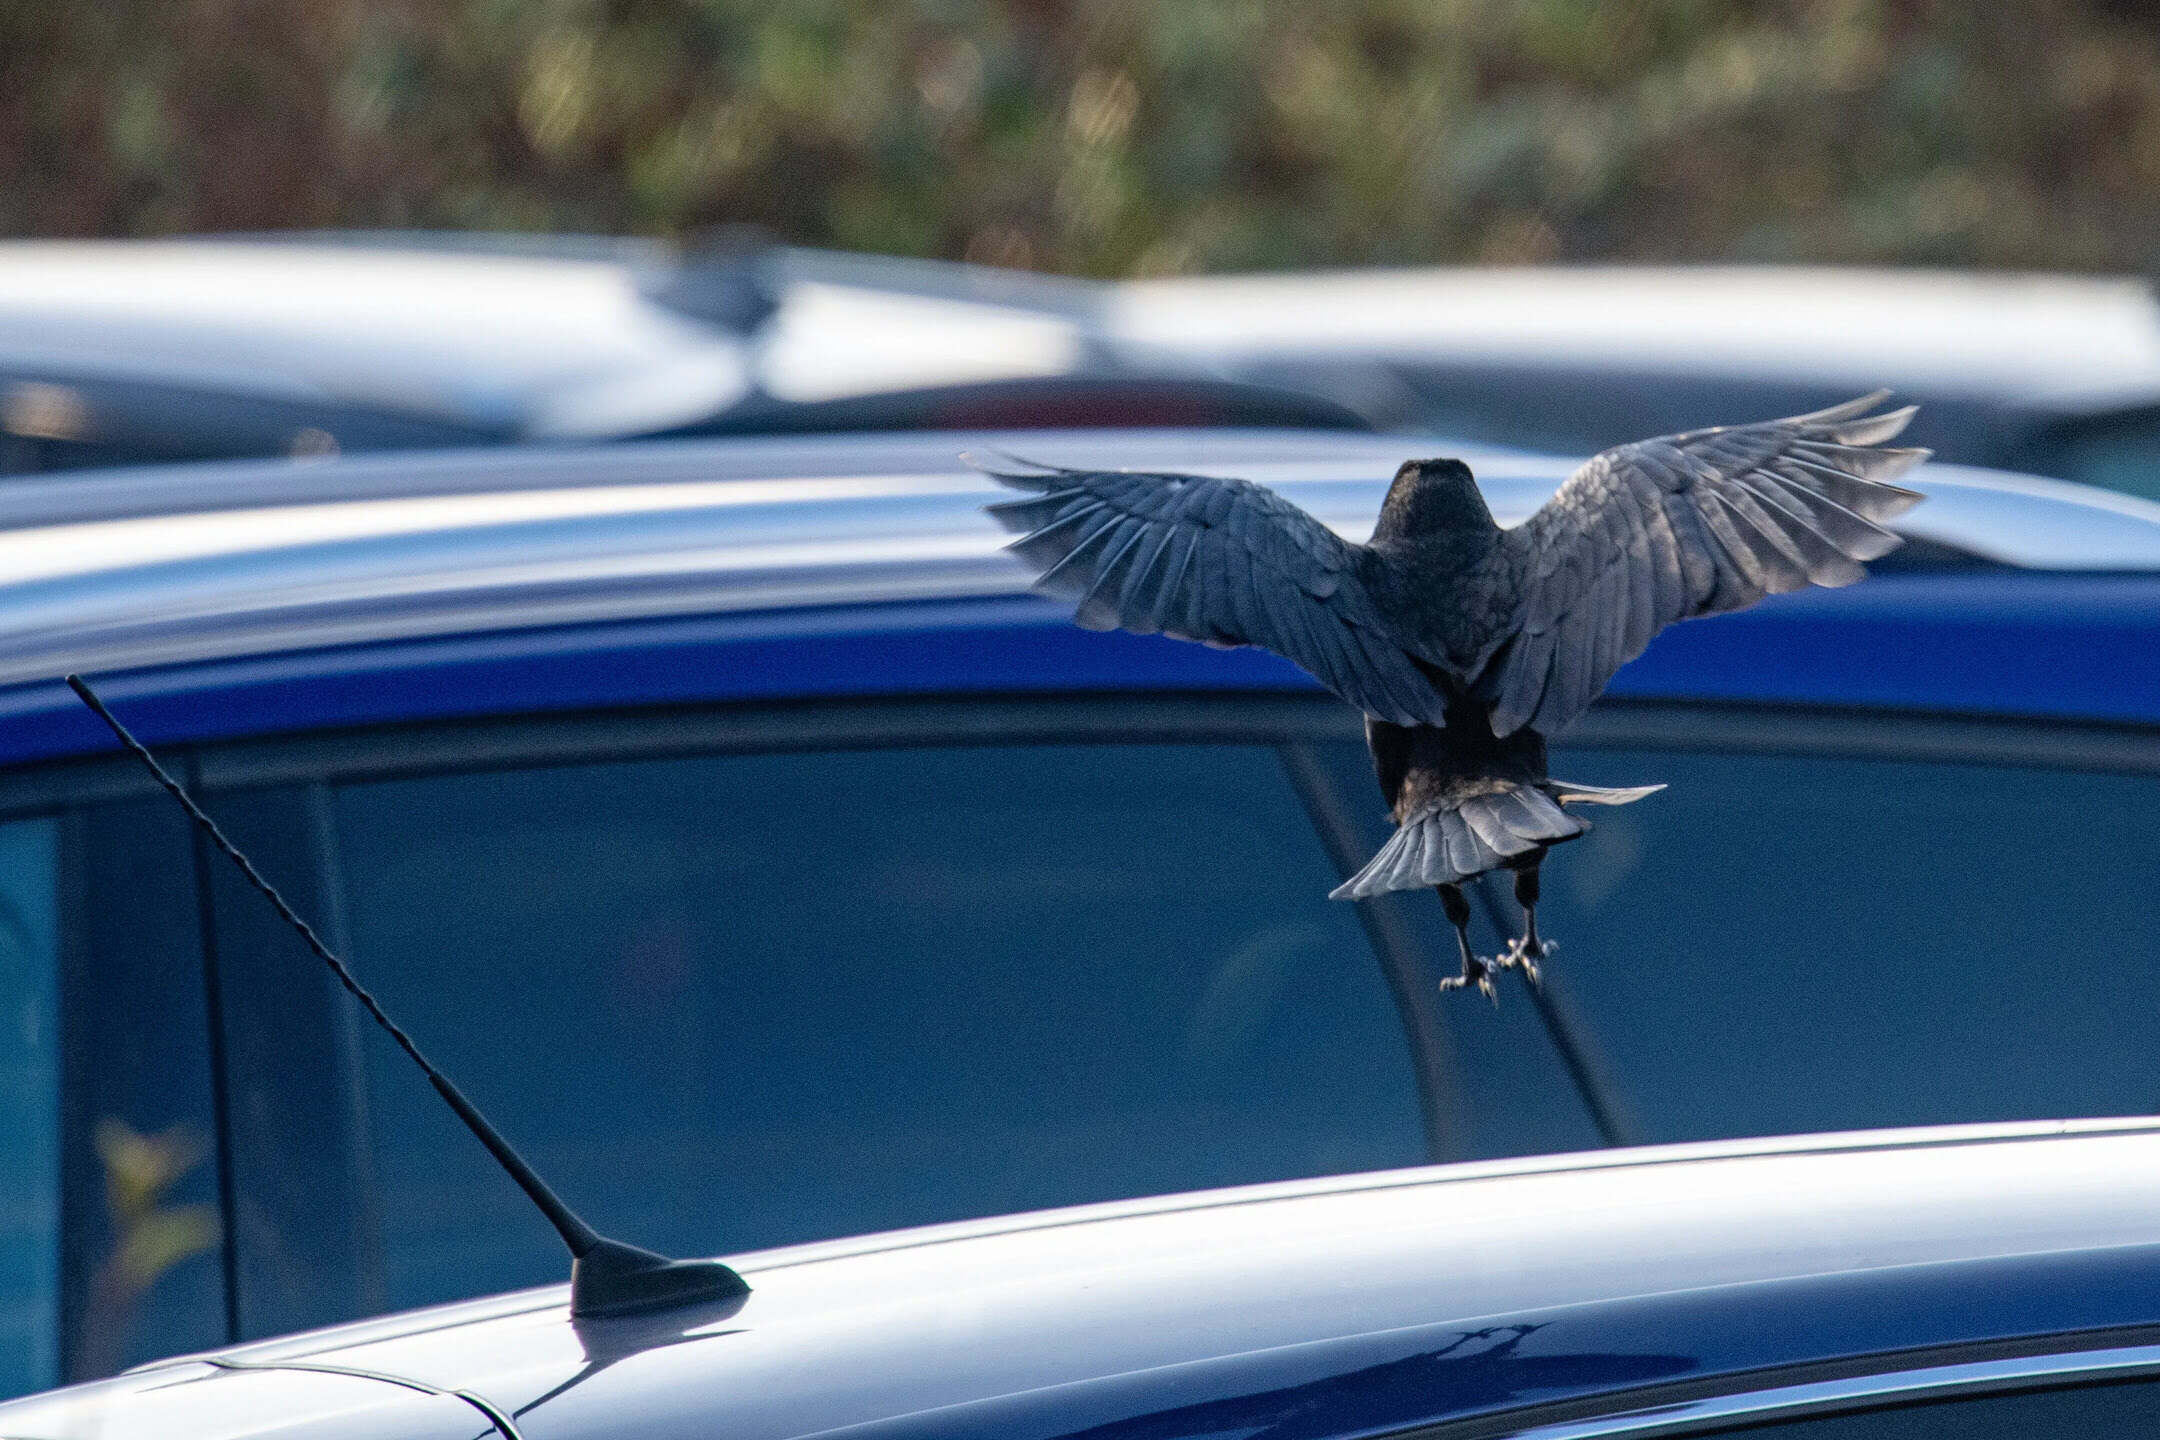 How To Stop Birds From Attacking Car Windows